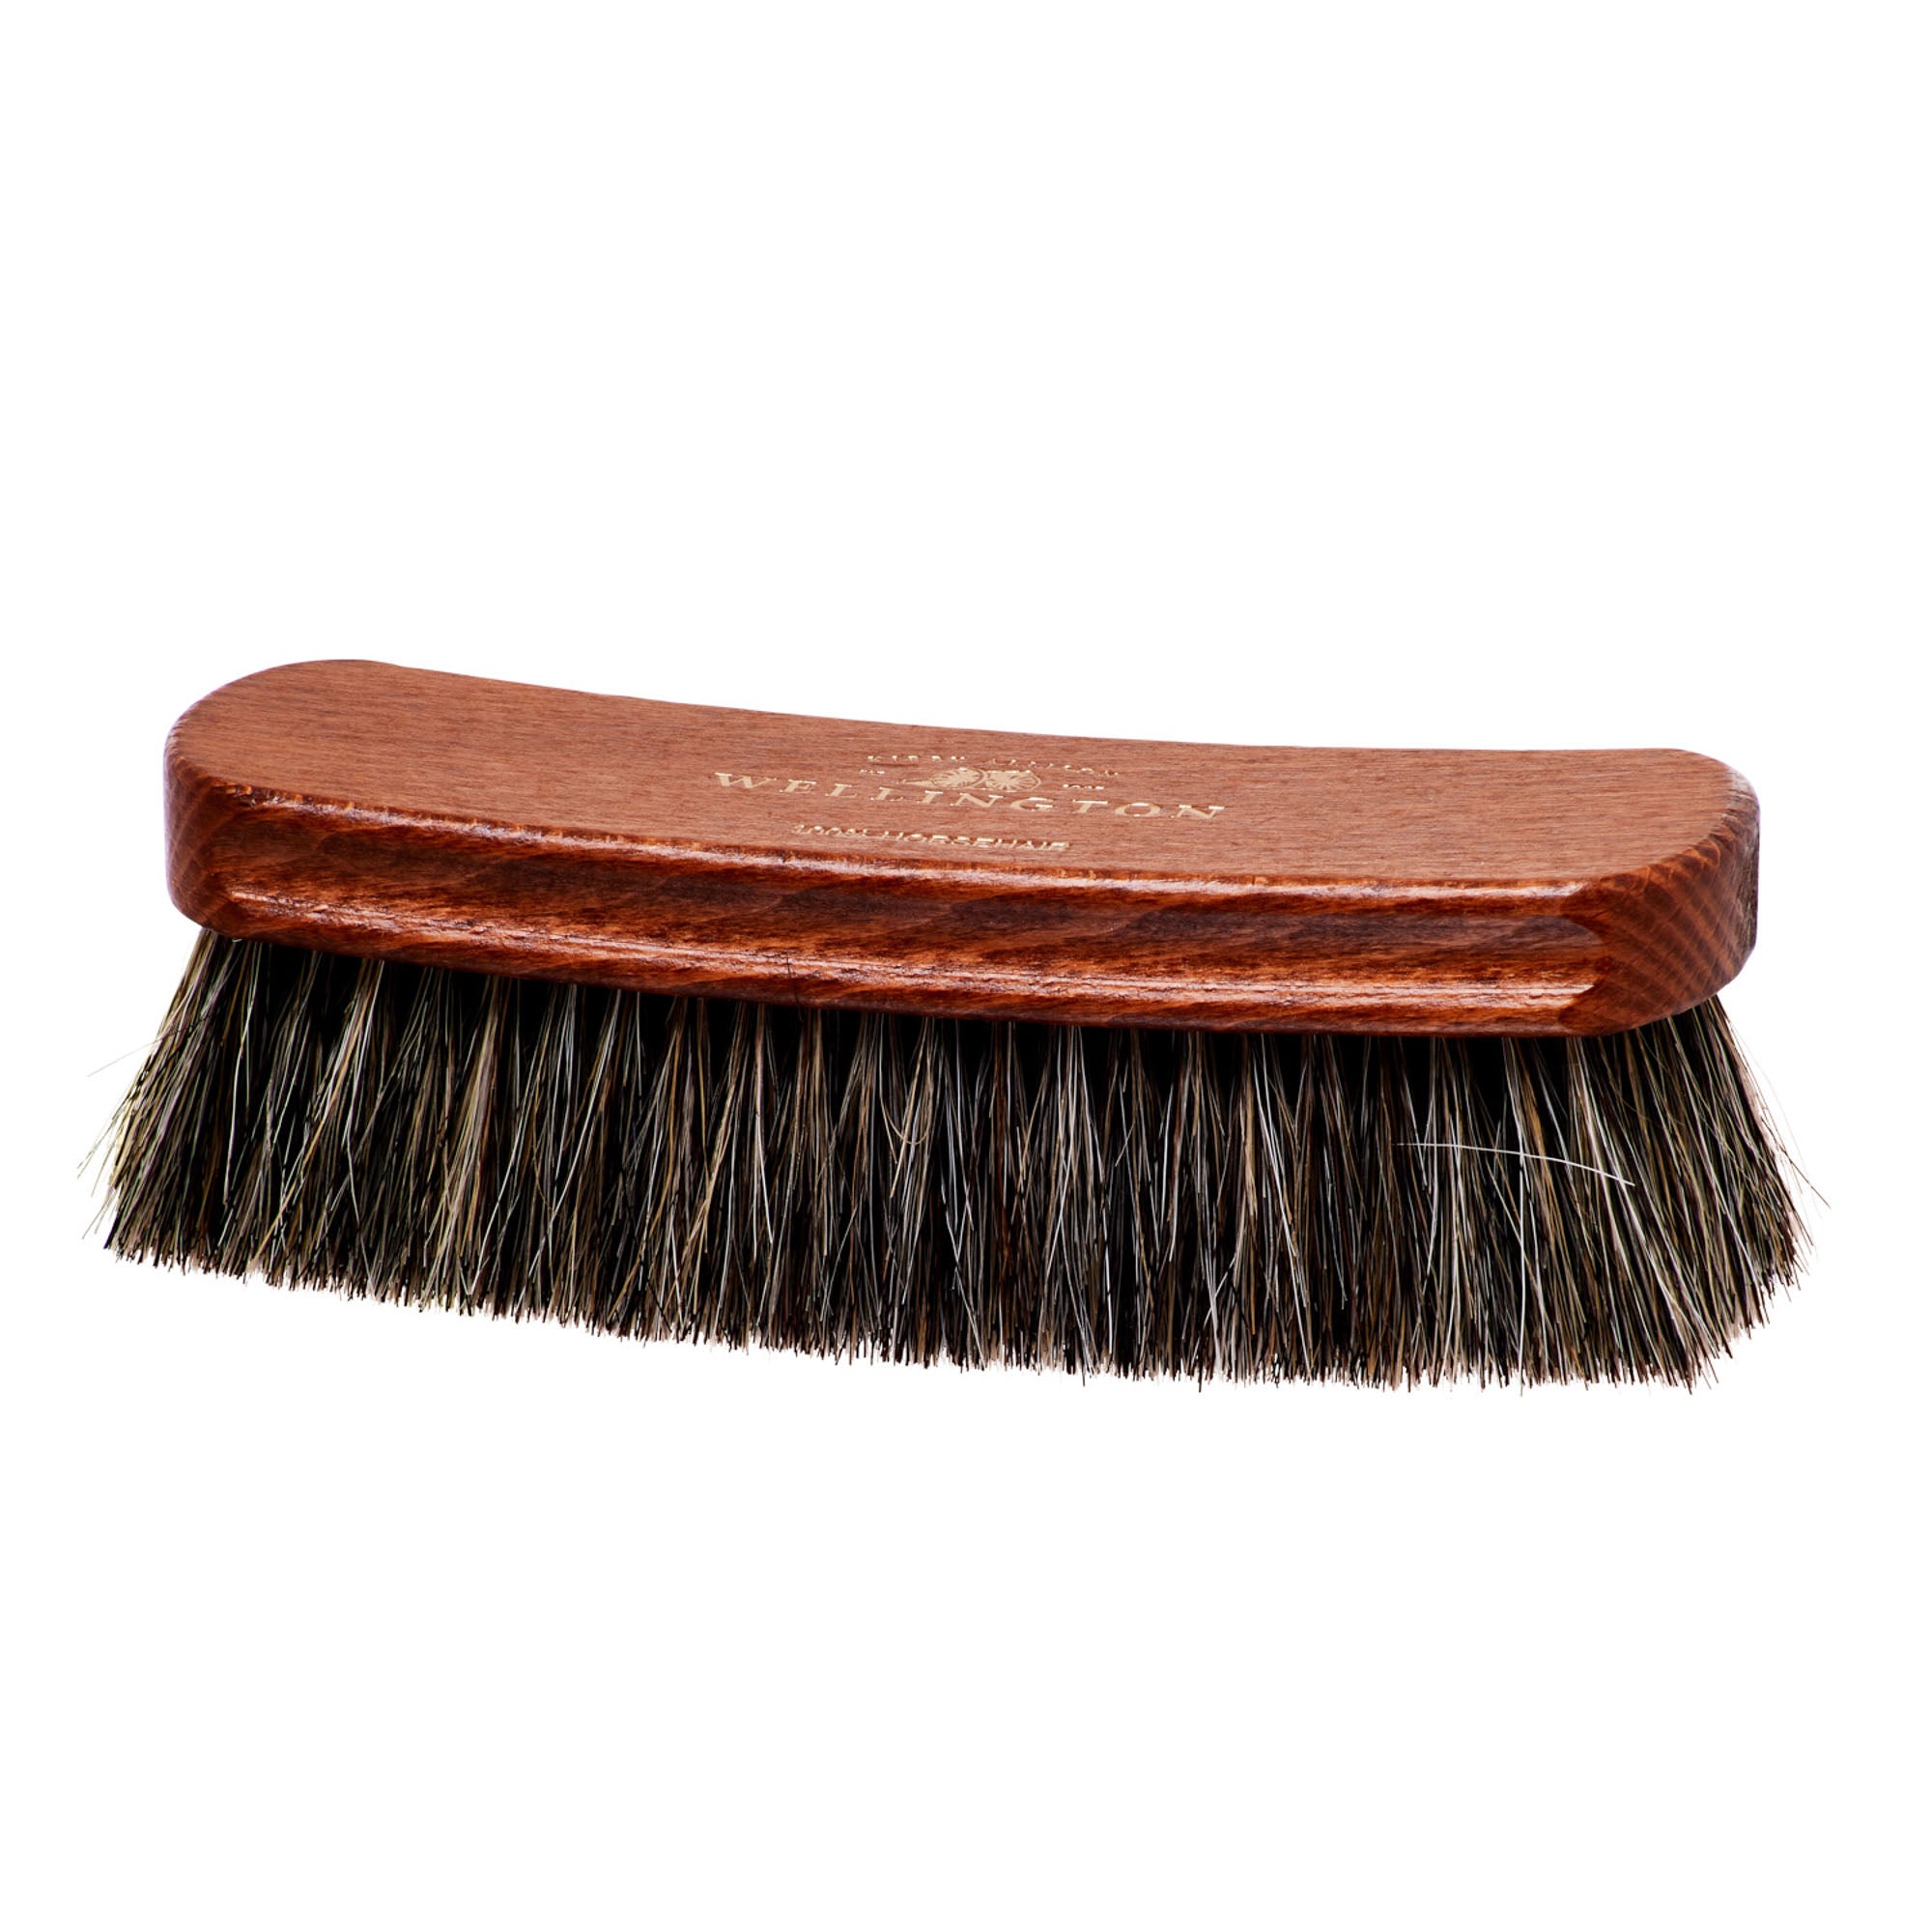 A Deluxe Wellington Horsehair Buffing Brush by KirbyAllison.com for shoe care with a wooden handle.